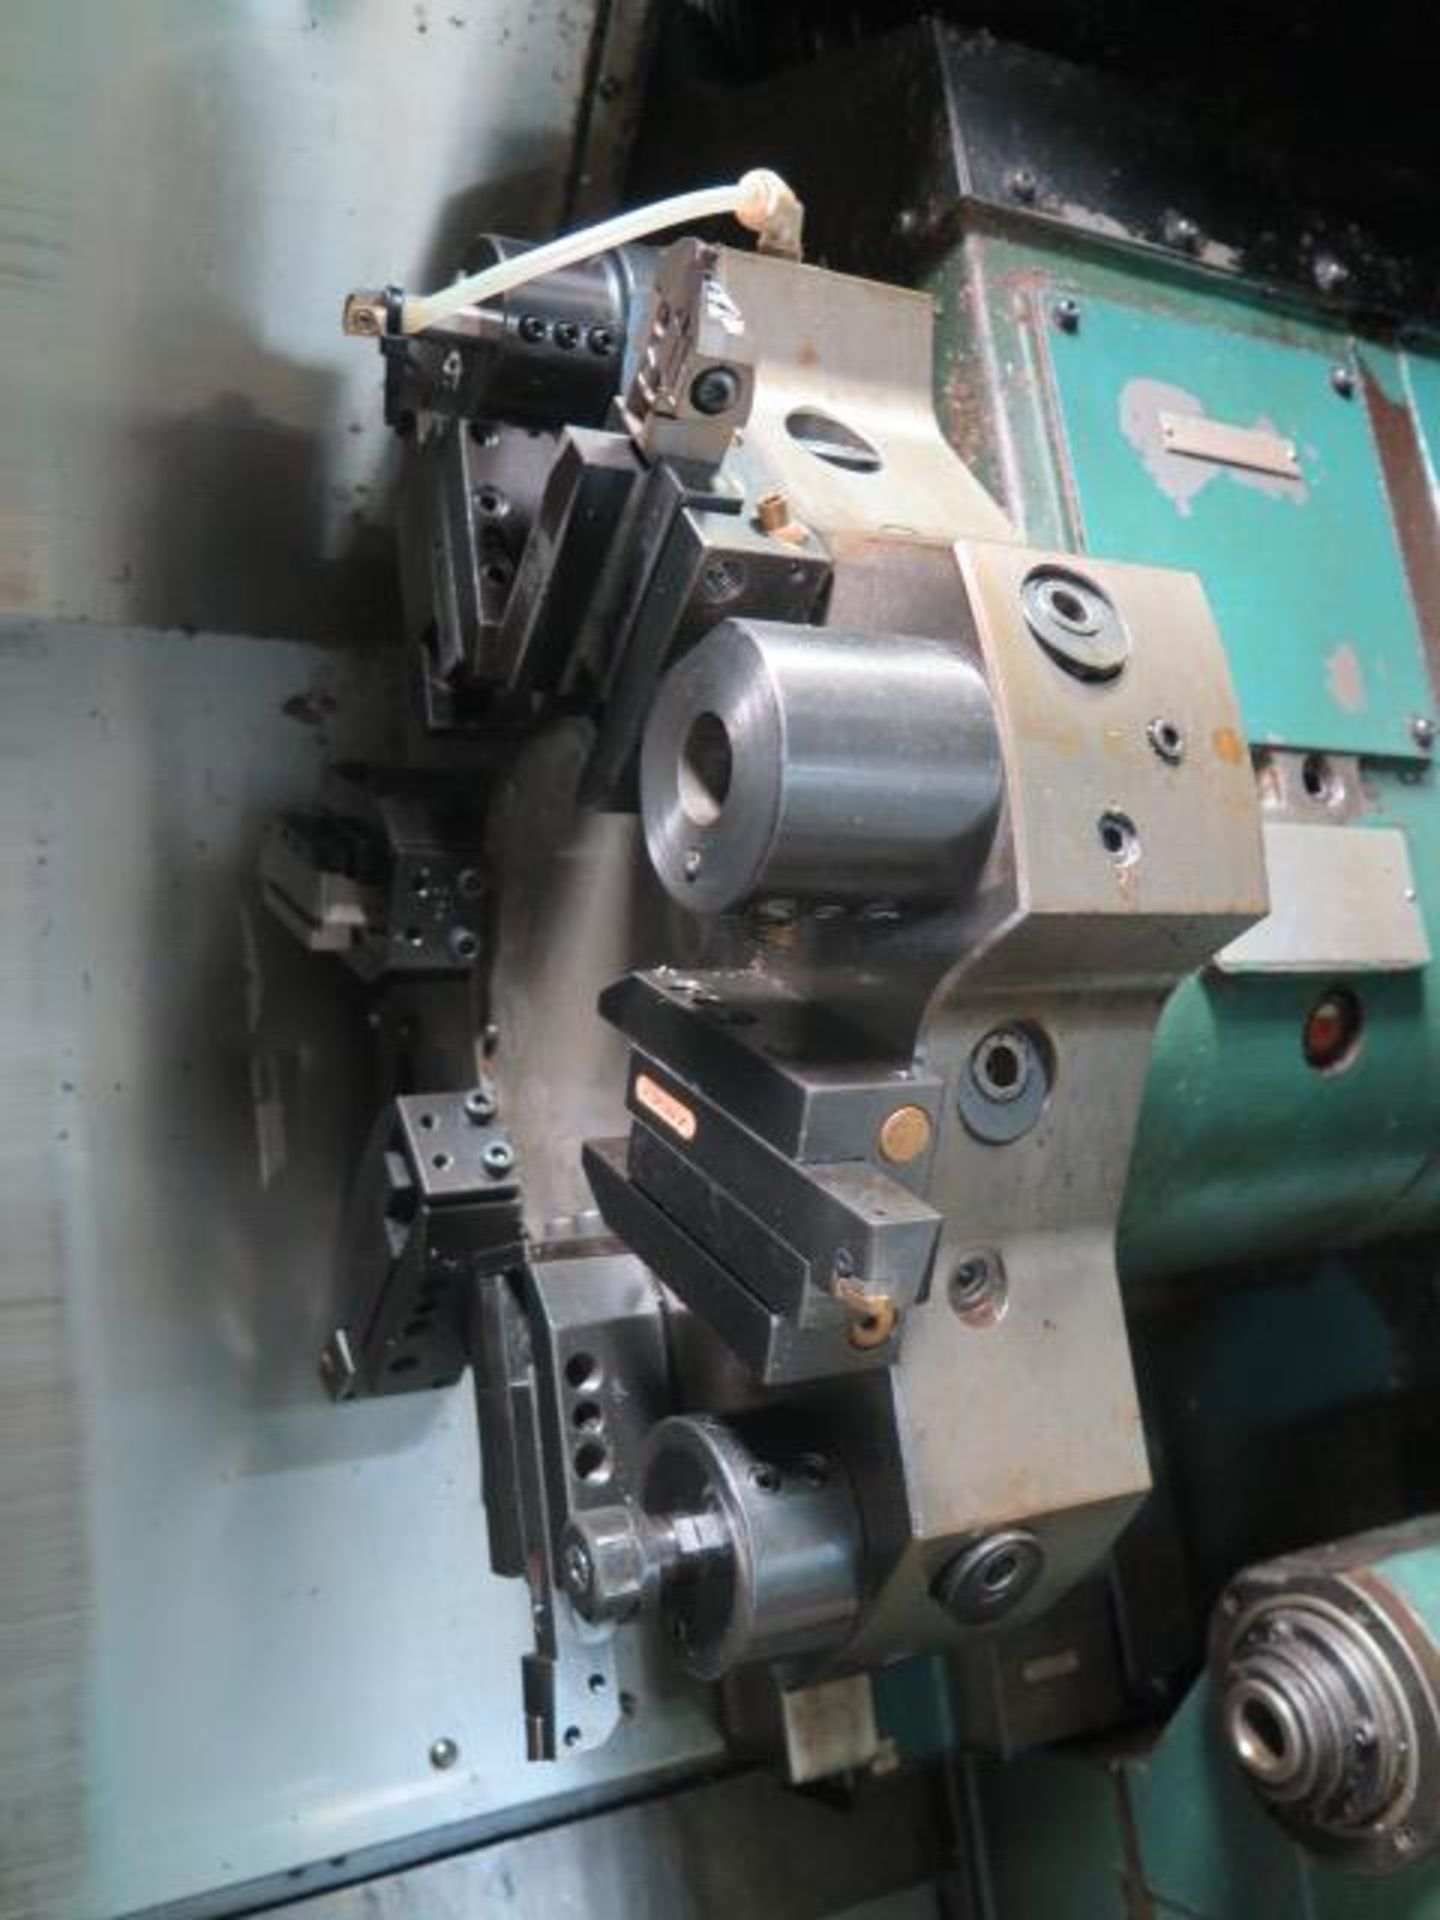 Nakamura Tome Methods Slant 1 CNC Turning Center s/n C24610 w/ Fanuc 11T, SOLD AS IS, LIVERMORE CA - Image 6 of 13